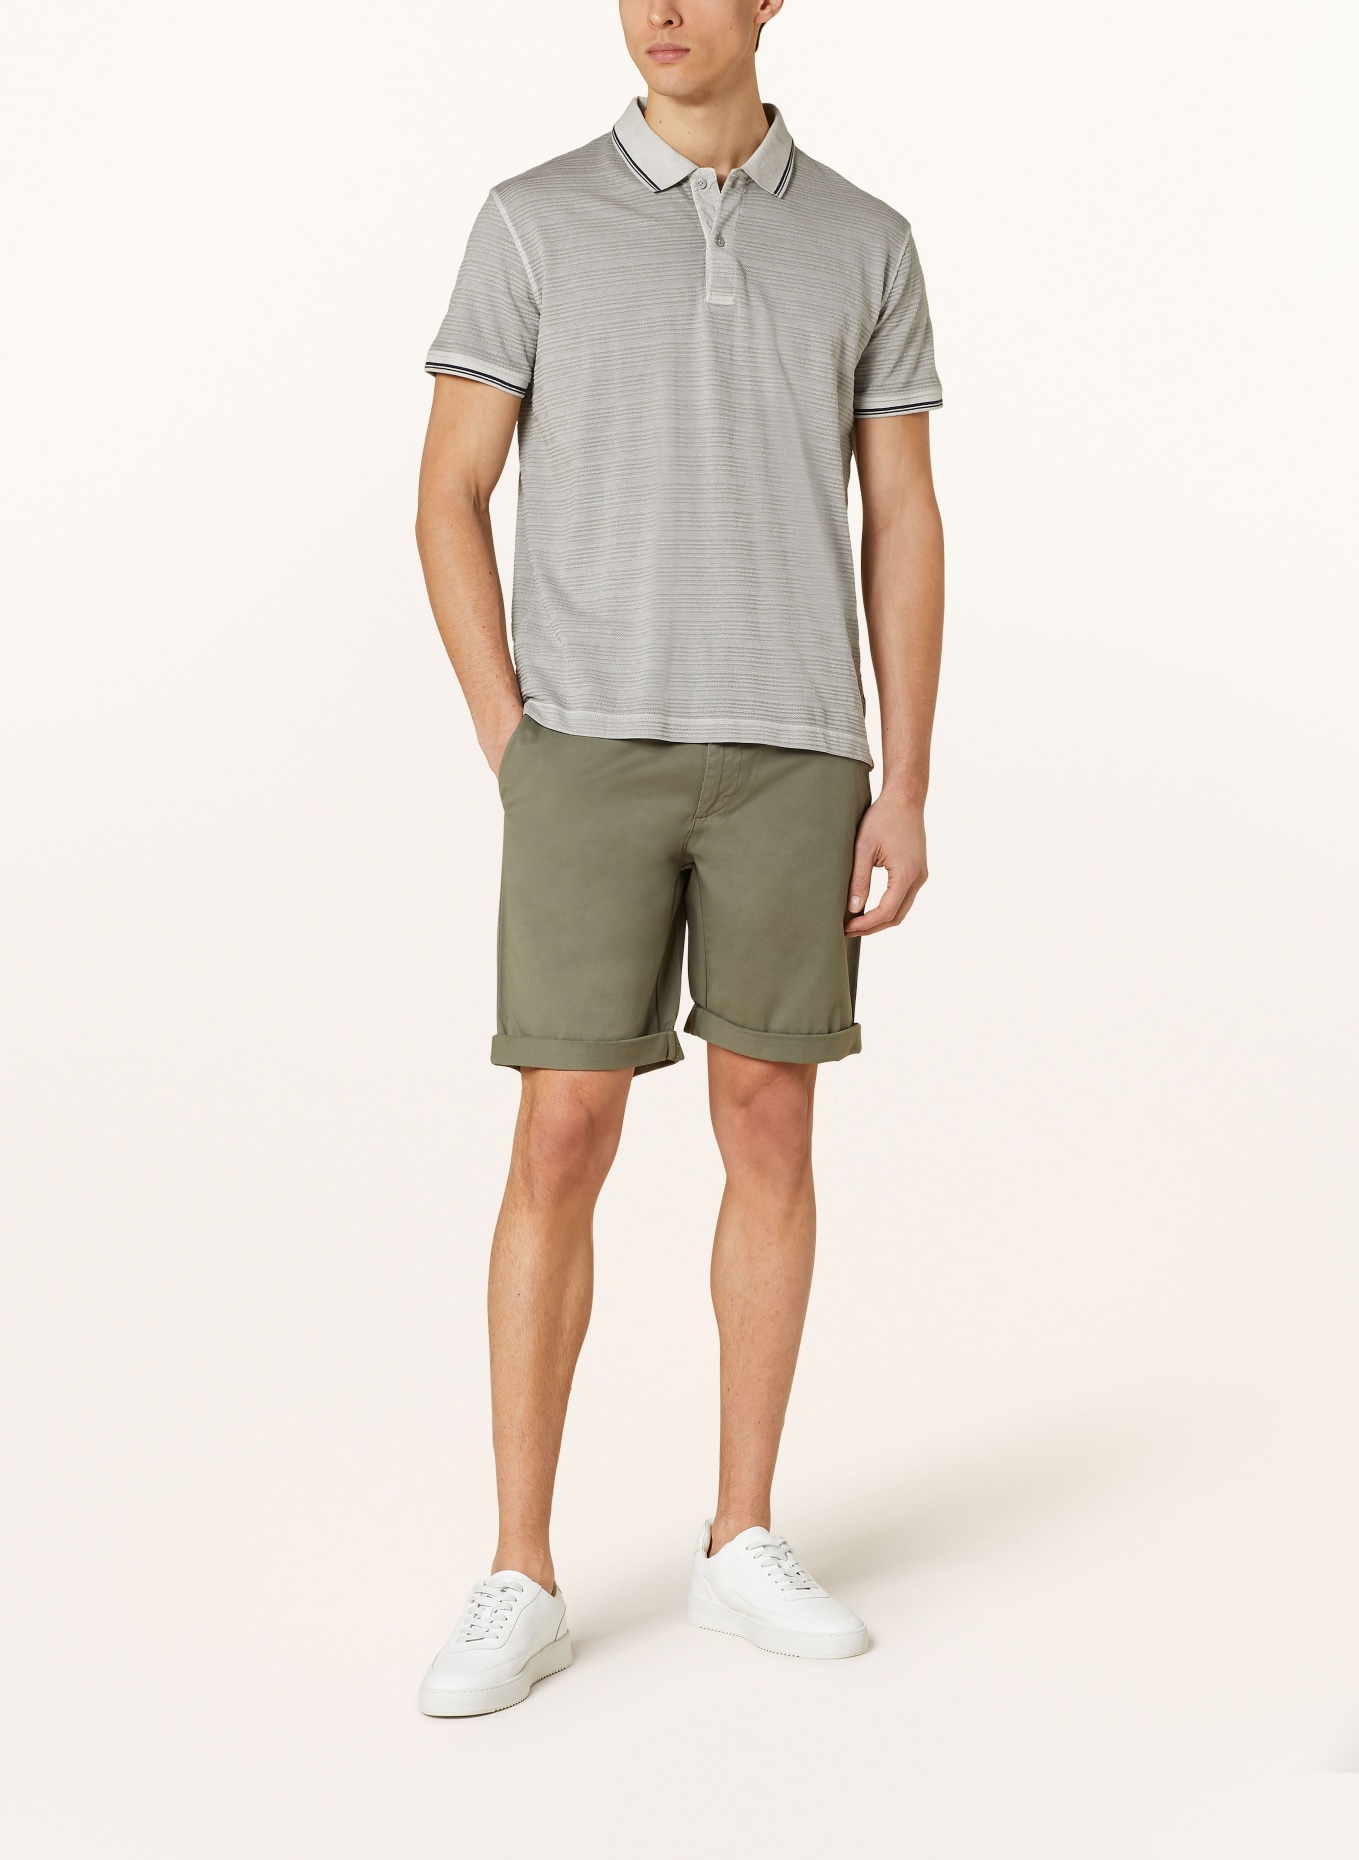 STROKESMAN'S Knitted polo shirt, Color: GRAY (Image 2)